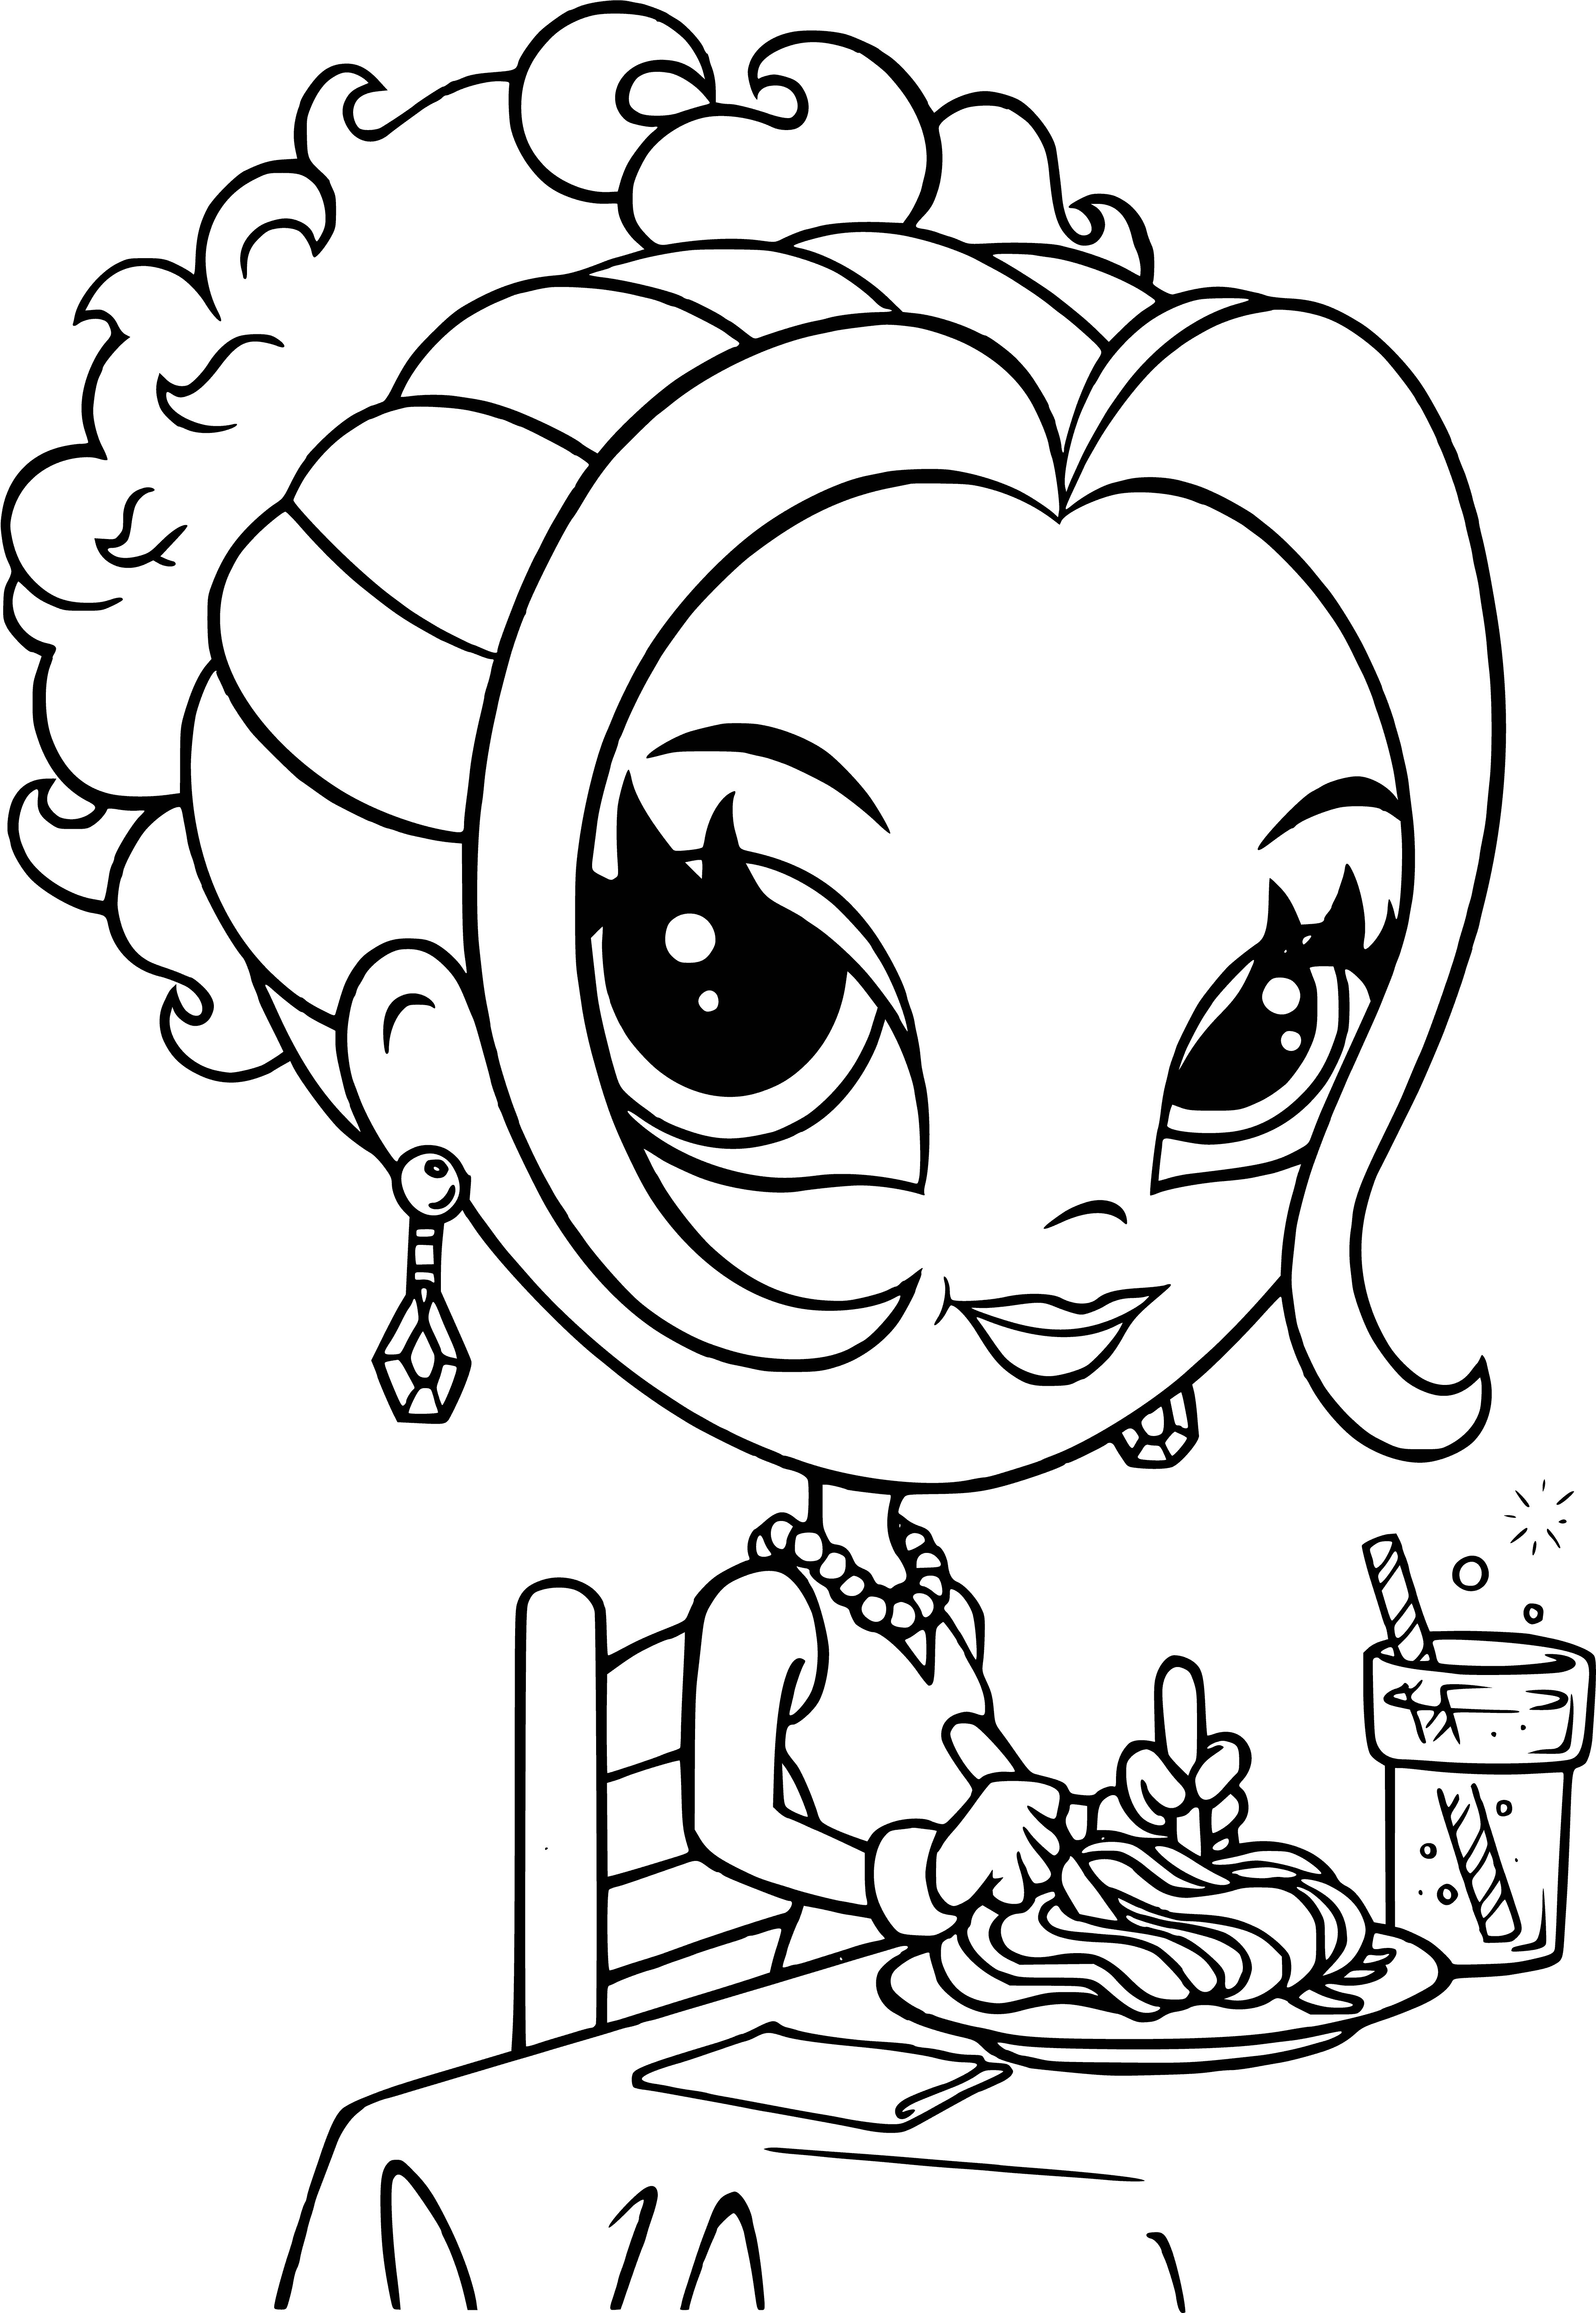 coloring page: Girl with crown, long pink dress & glittery design holding pink umbrella & bag against background of stars.